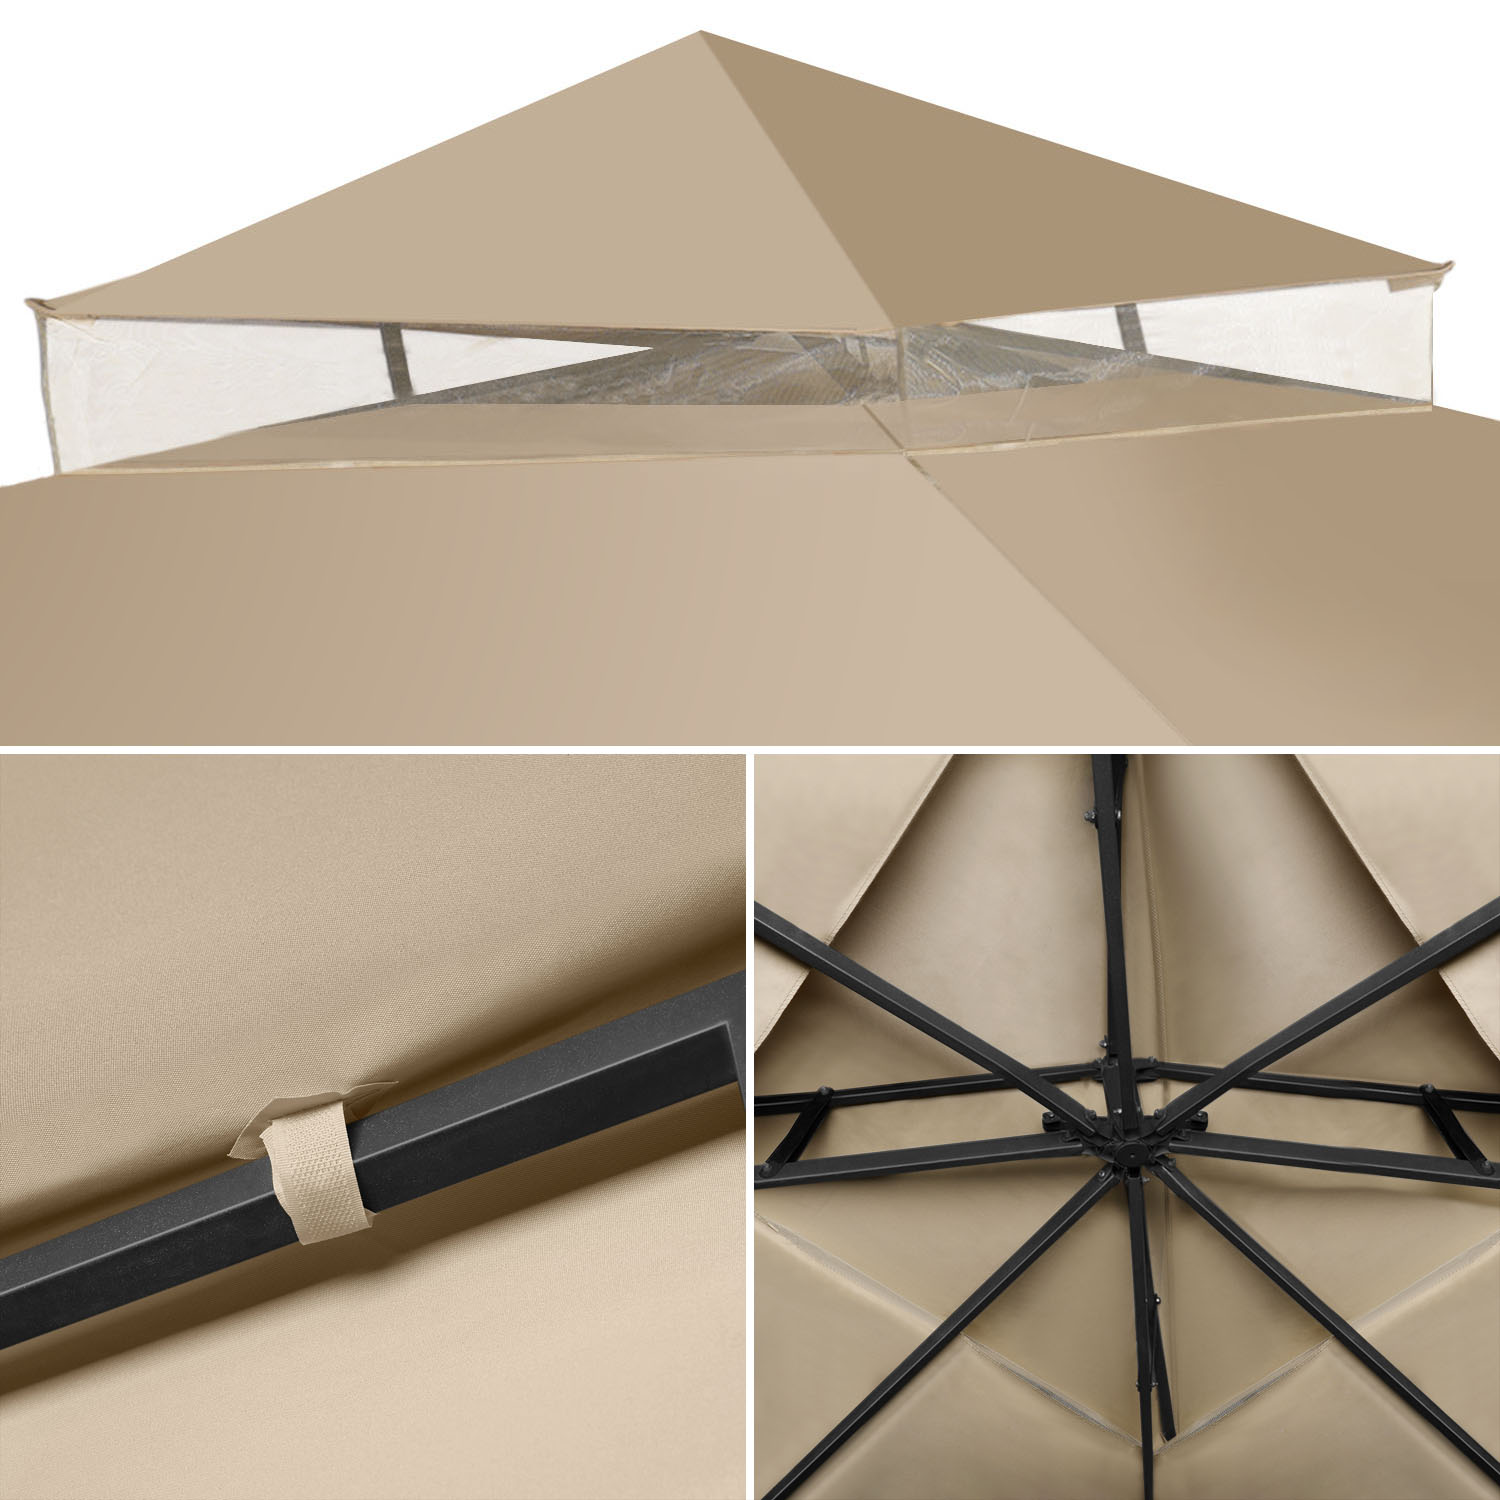 8 x 8 Feet Gazebo Canopy Top Replacement Cover (Beige) - Dual Tier Up Tent Accessory with Plain Edge Polyester UV30 Protection Water Resistant for Outdoor Patio Backyard Garden Lawn Sun Shade - image 3 of 8